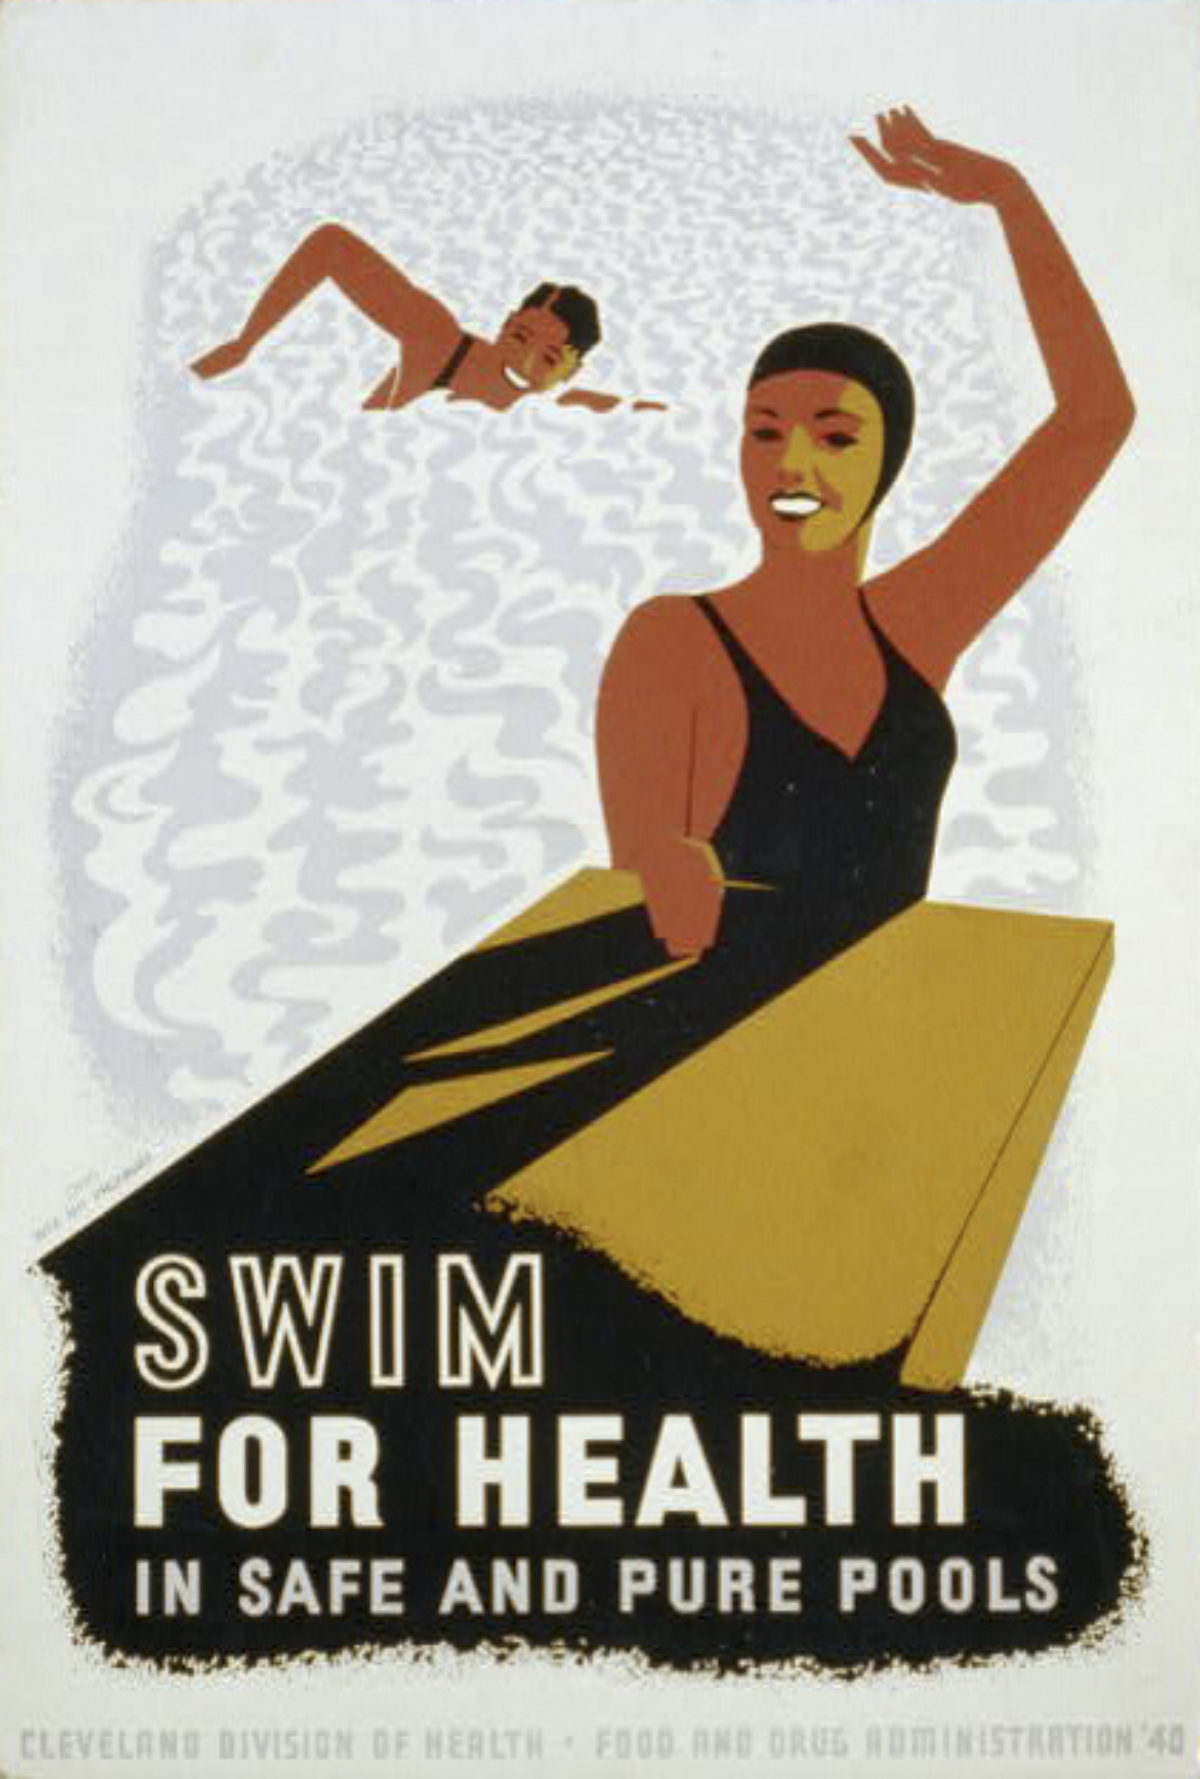 Swim-for-health-in-safe-and-pure-pools